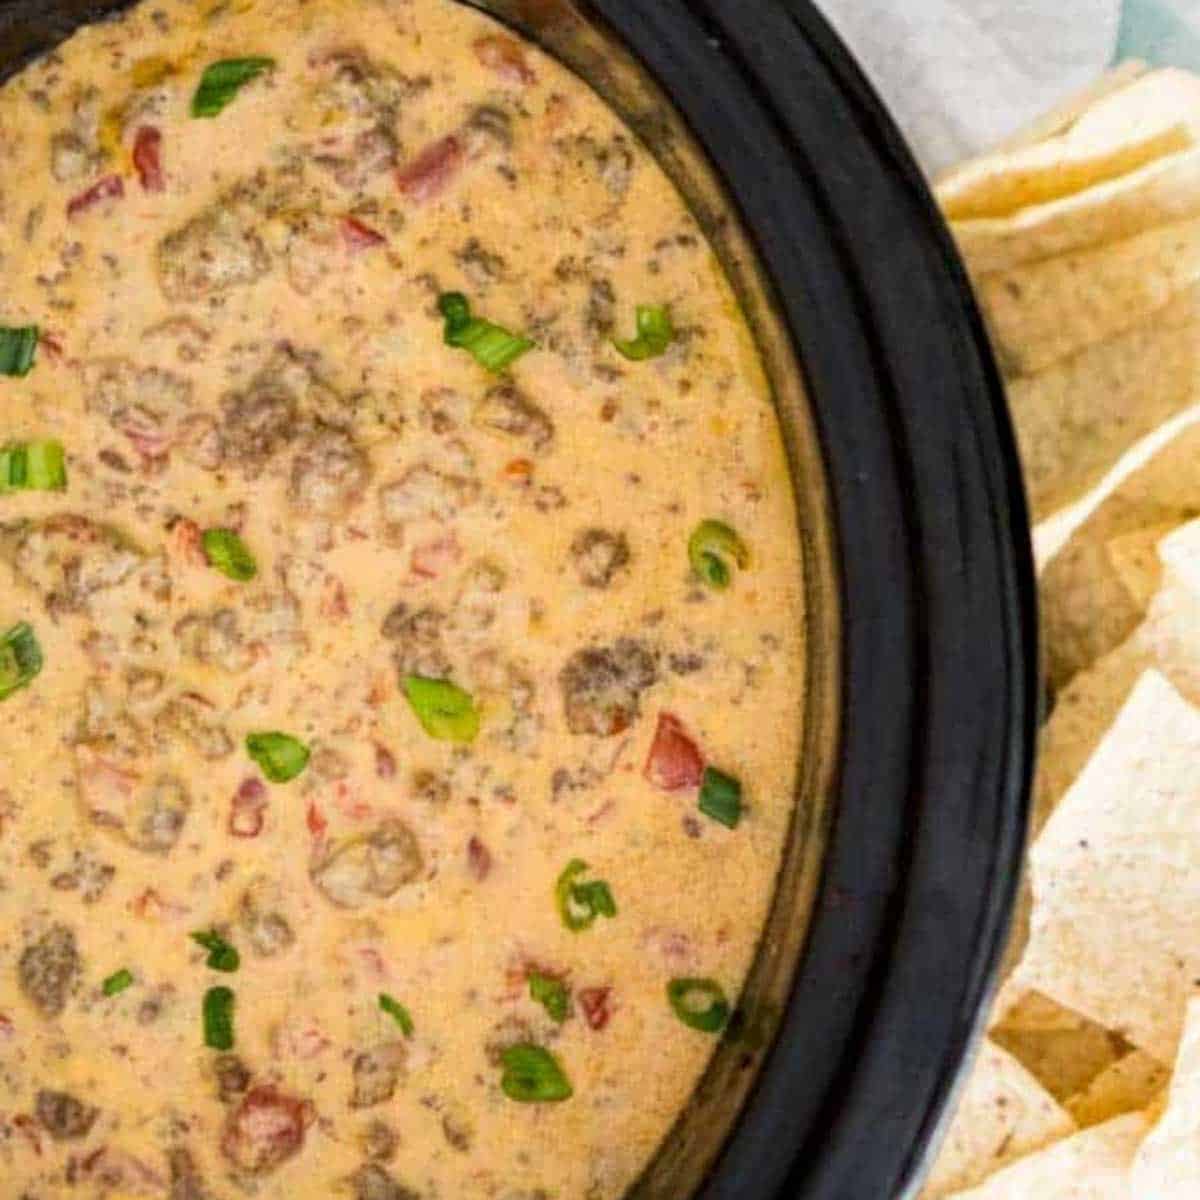 https://www.shakentogetherlife.com/wp-content/uploads/2019/08/queso-featured.jpg